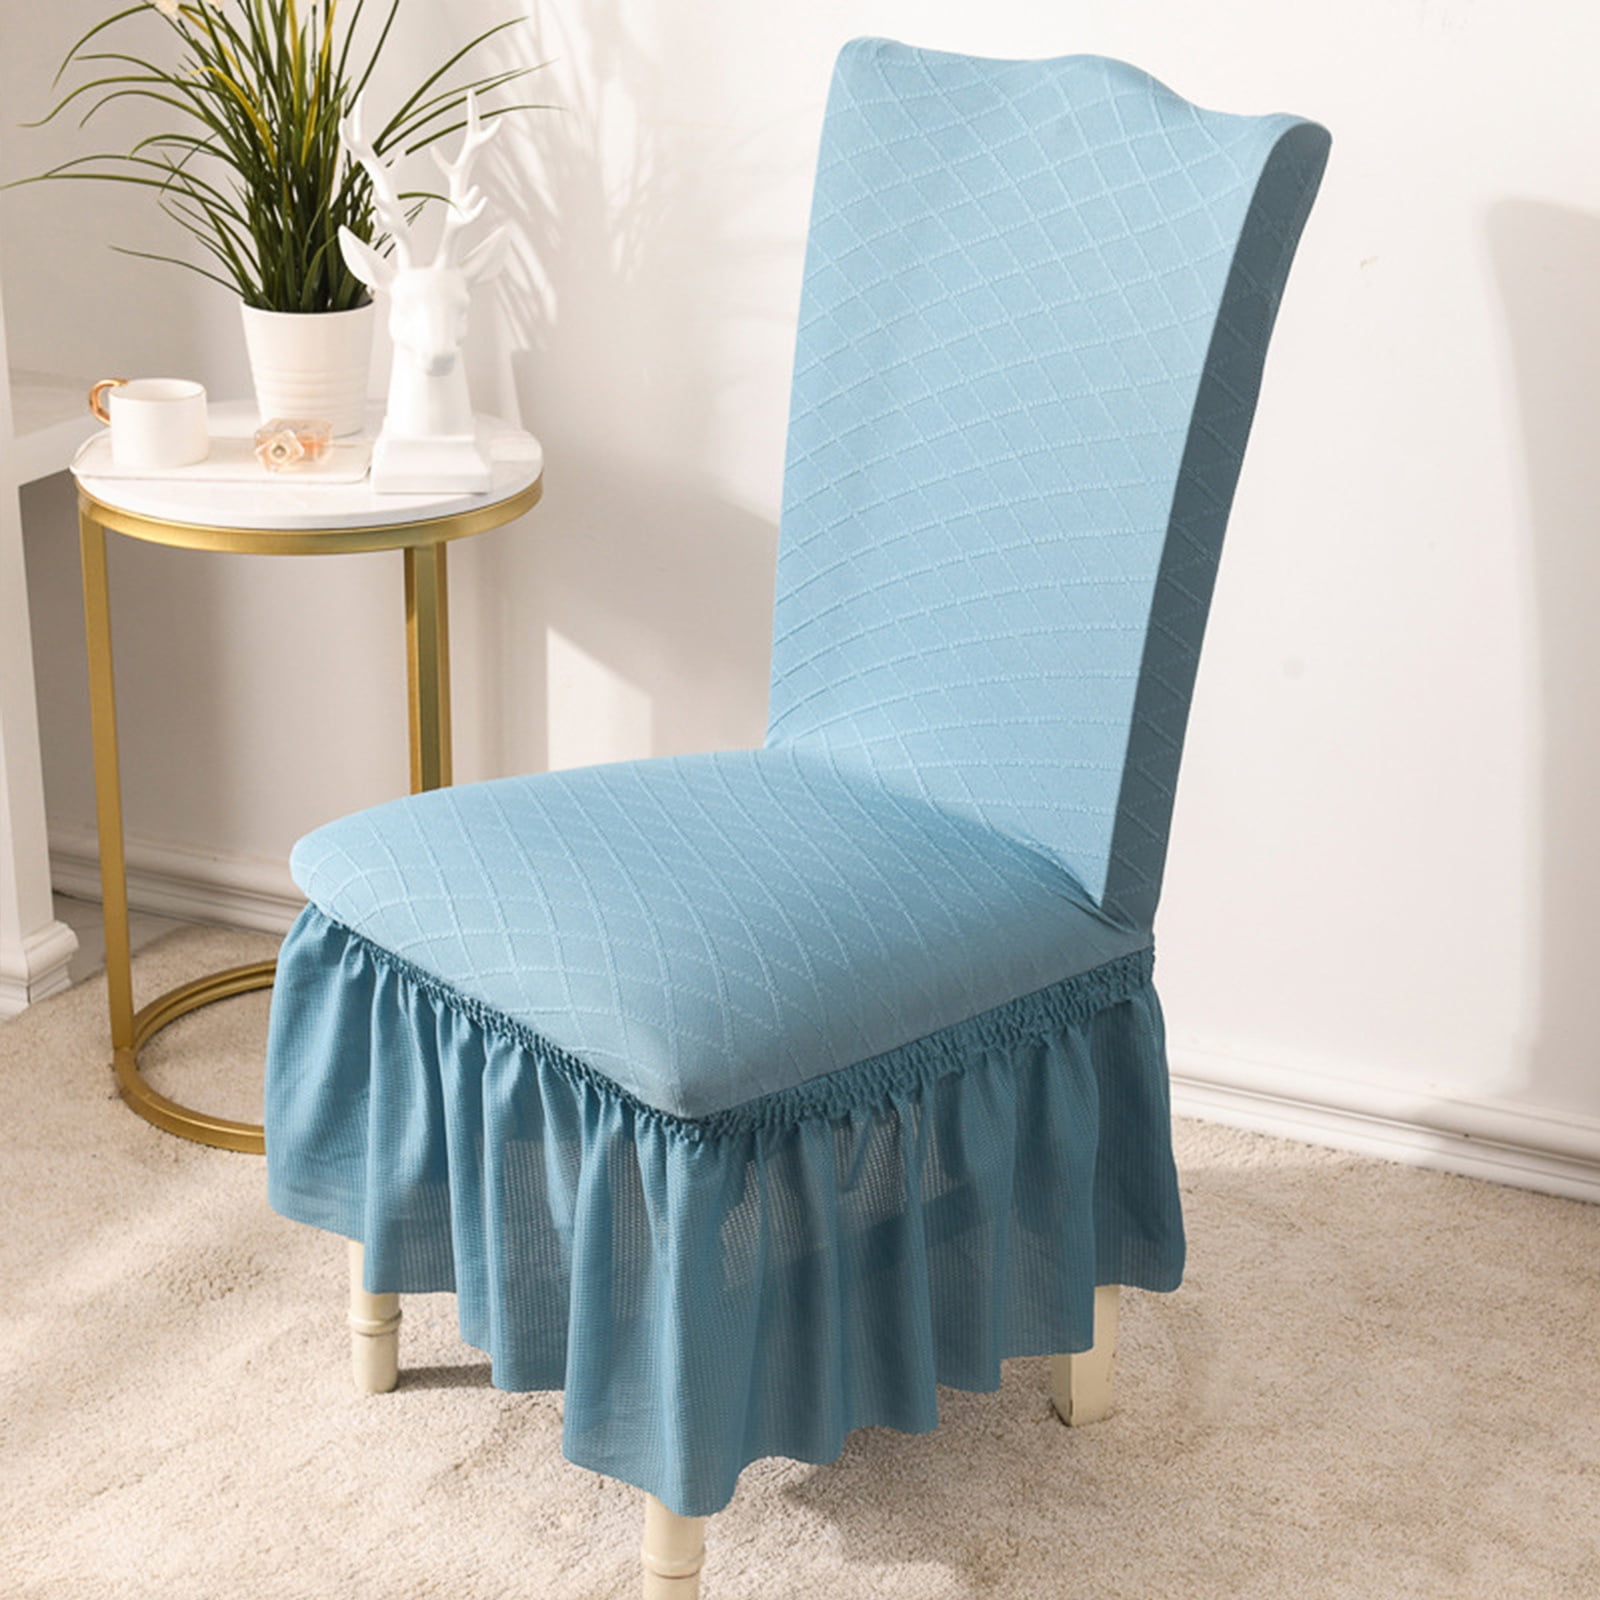 Dustproof  Dining Chair Cover Slipcovers Pleated for Home Wedding Banquet Seat 